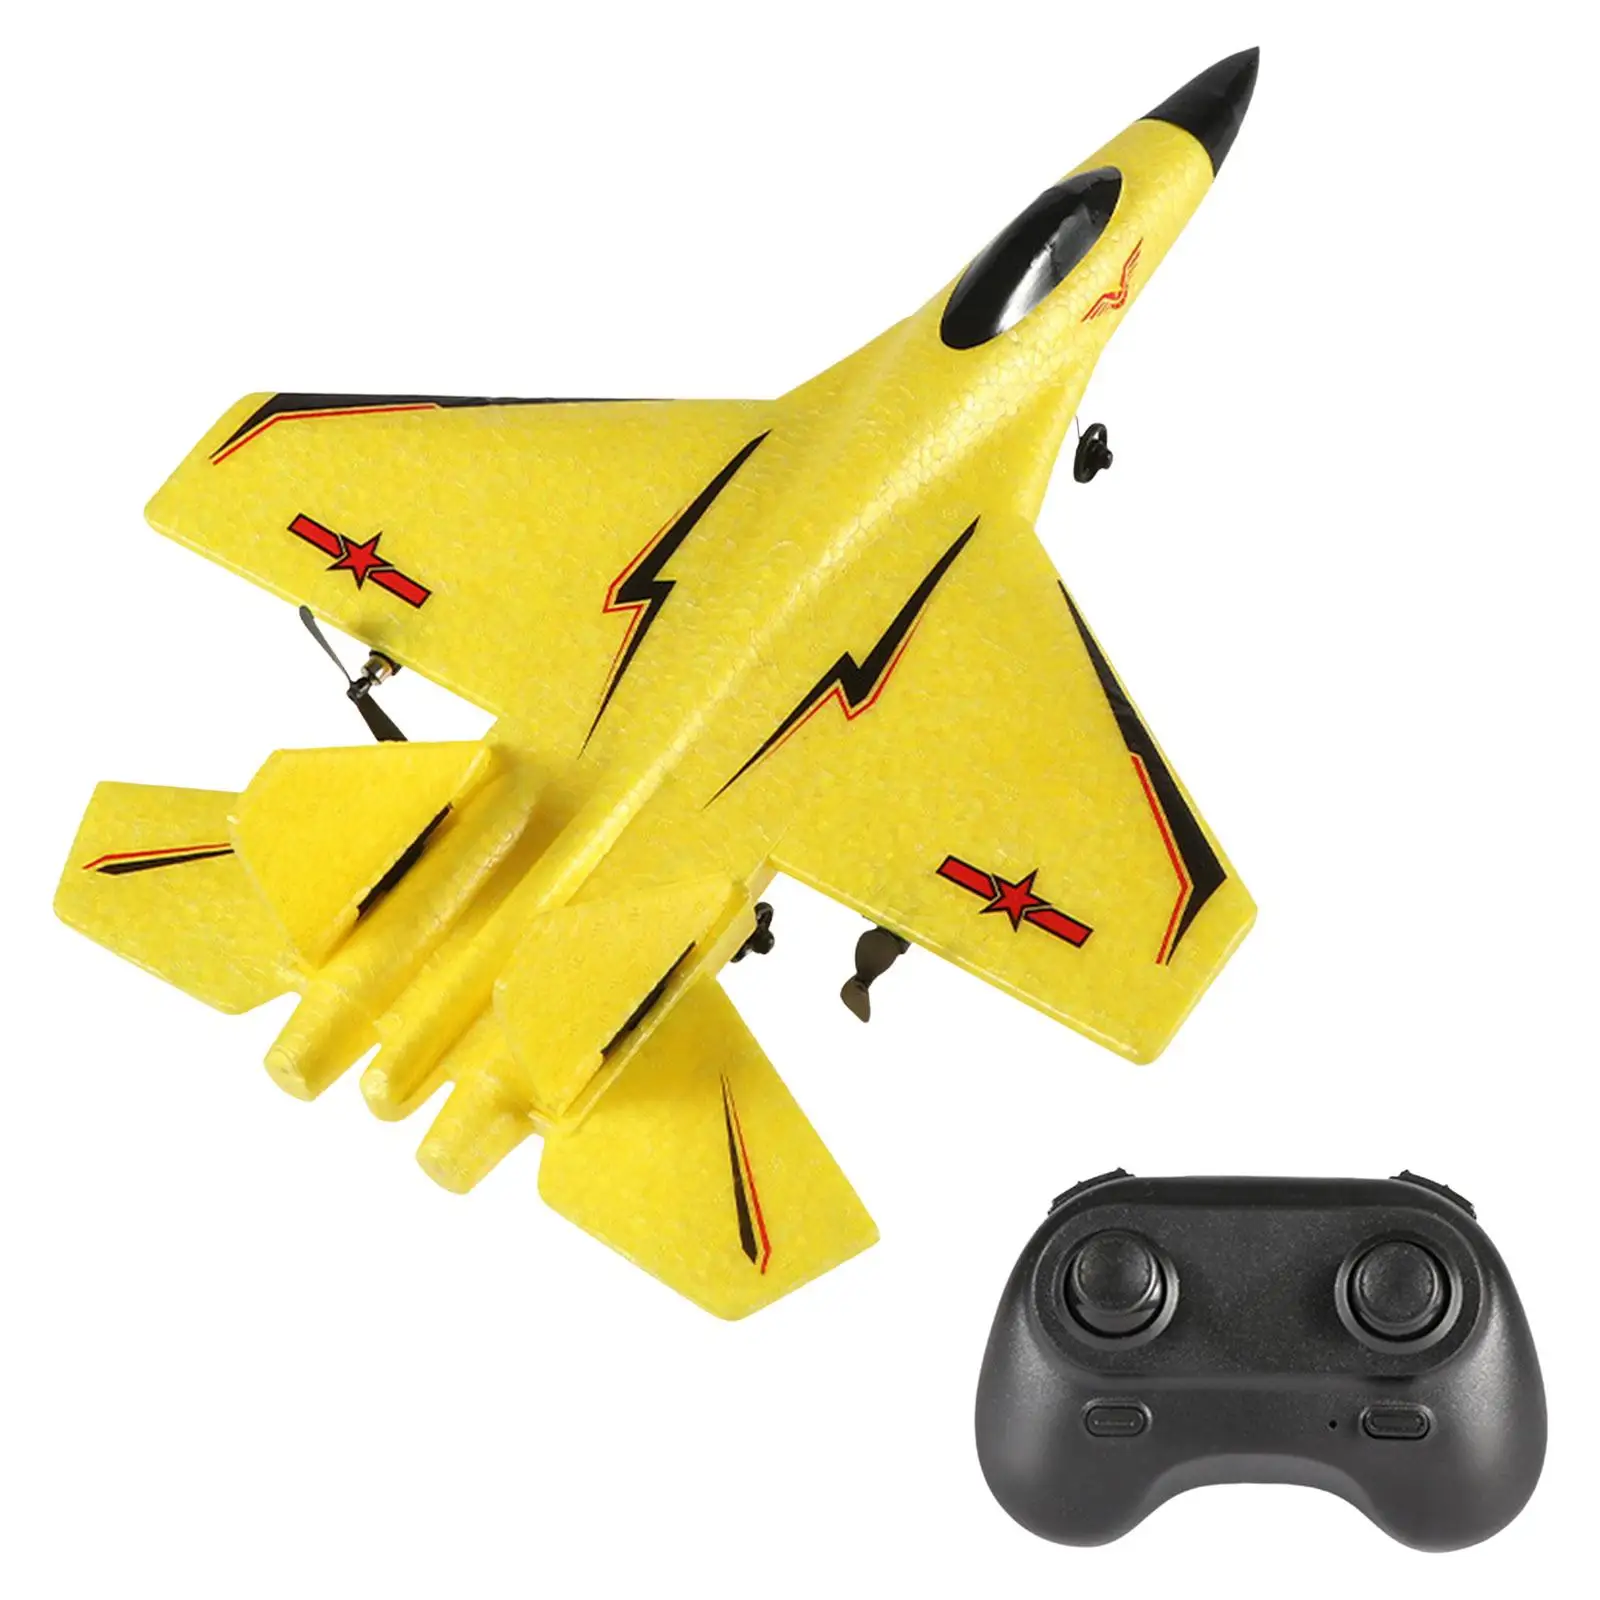 RC Plane Foam Airplane A Key to Take Off Easy to Control Outdoor Toy 2 Channel Fighter Model RC Fixed Wing RC Jet Glider